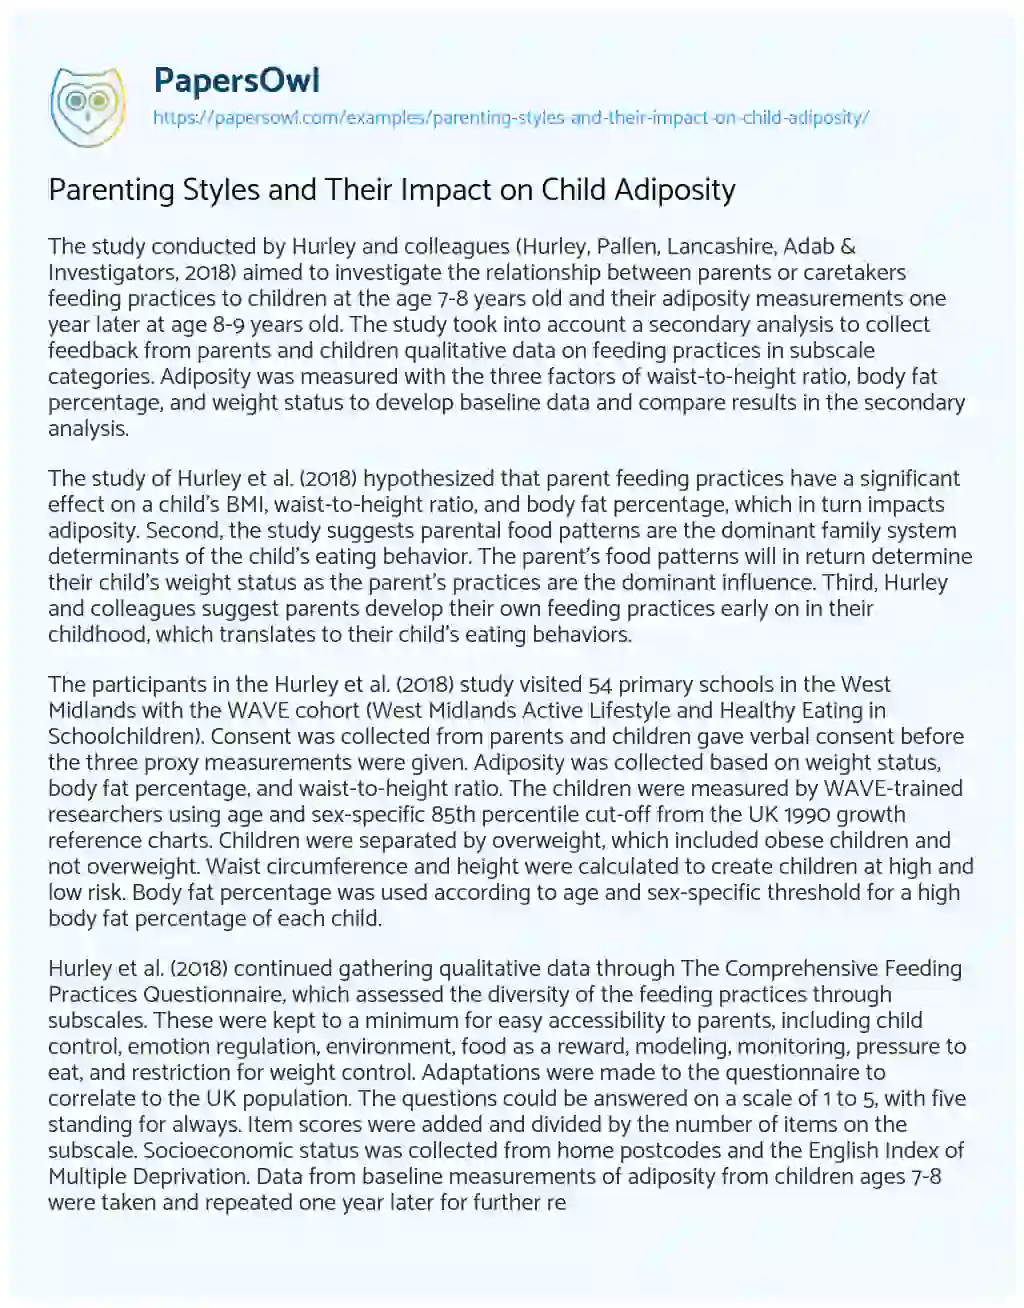 Parenting Styles and Their Impact on Child Adiposity - Free Essay ...